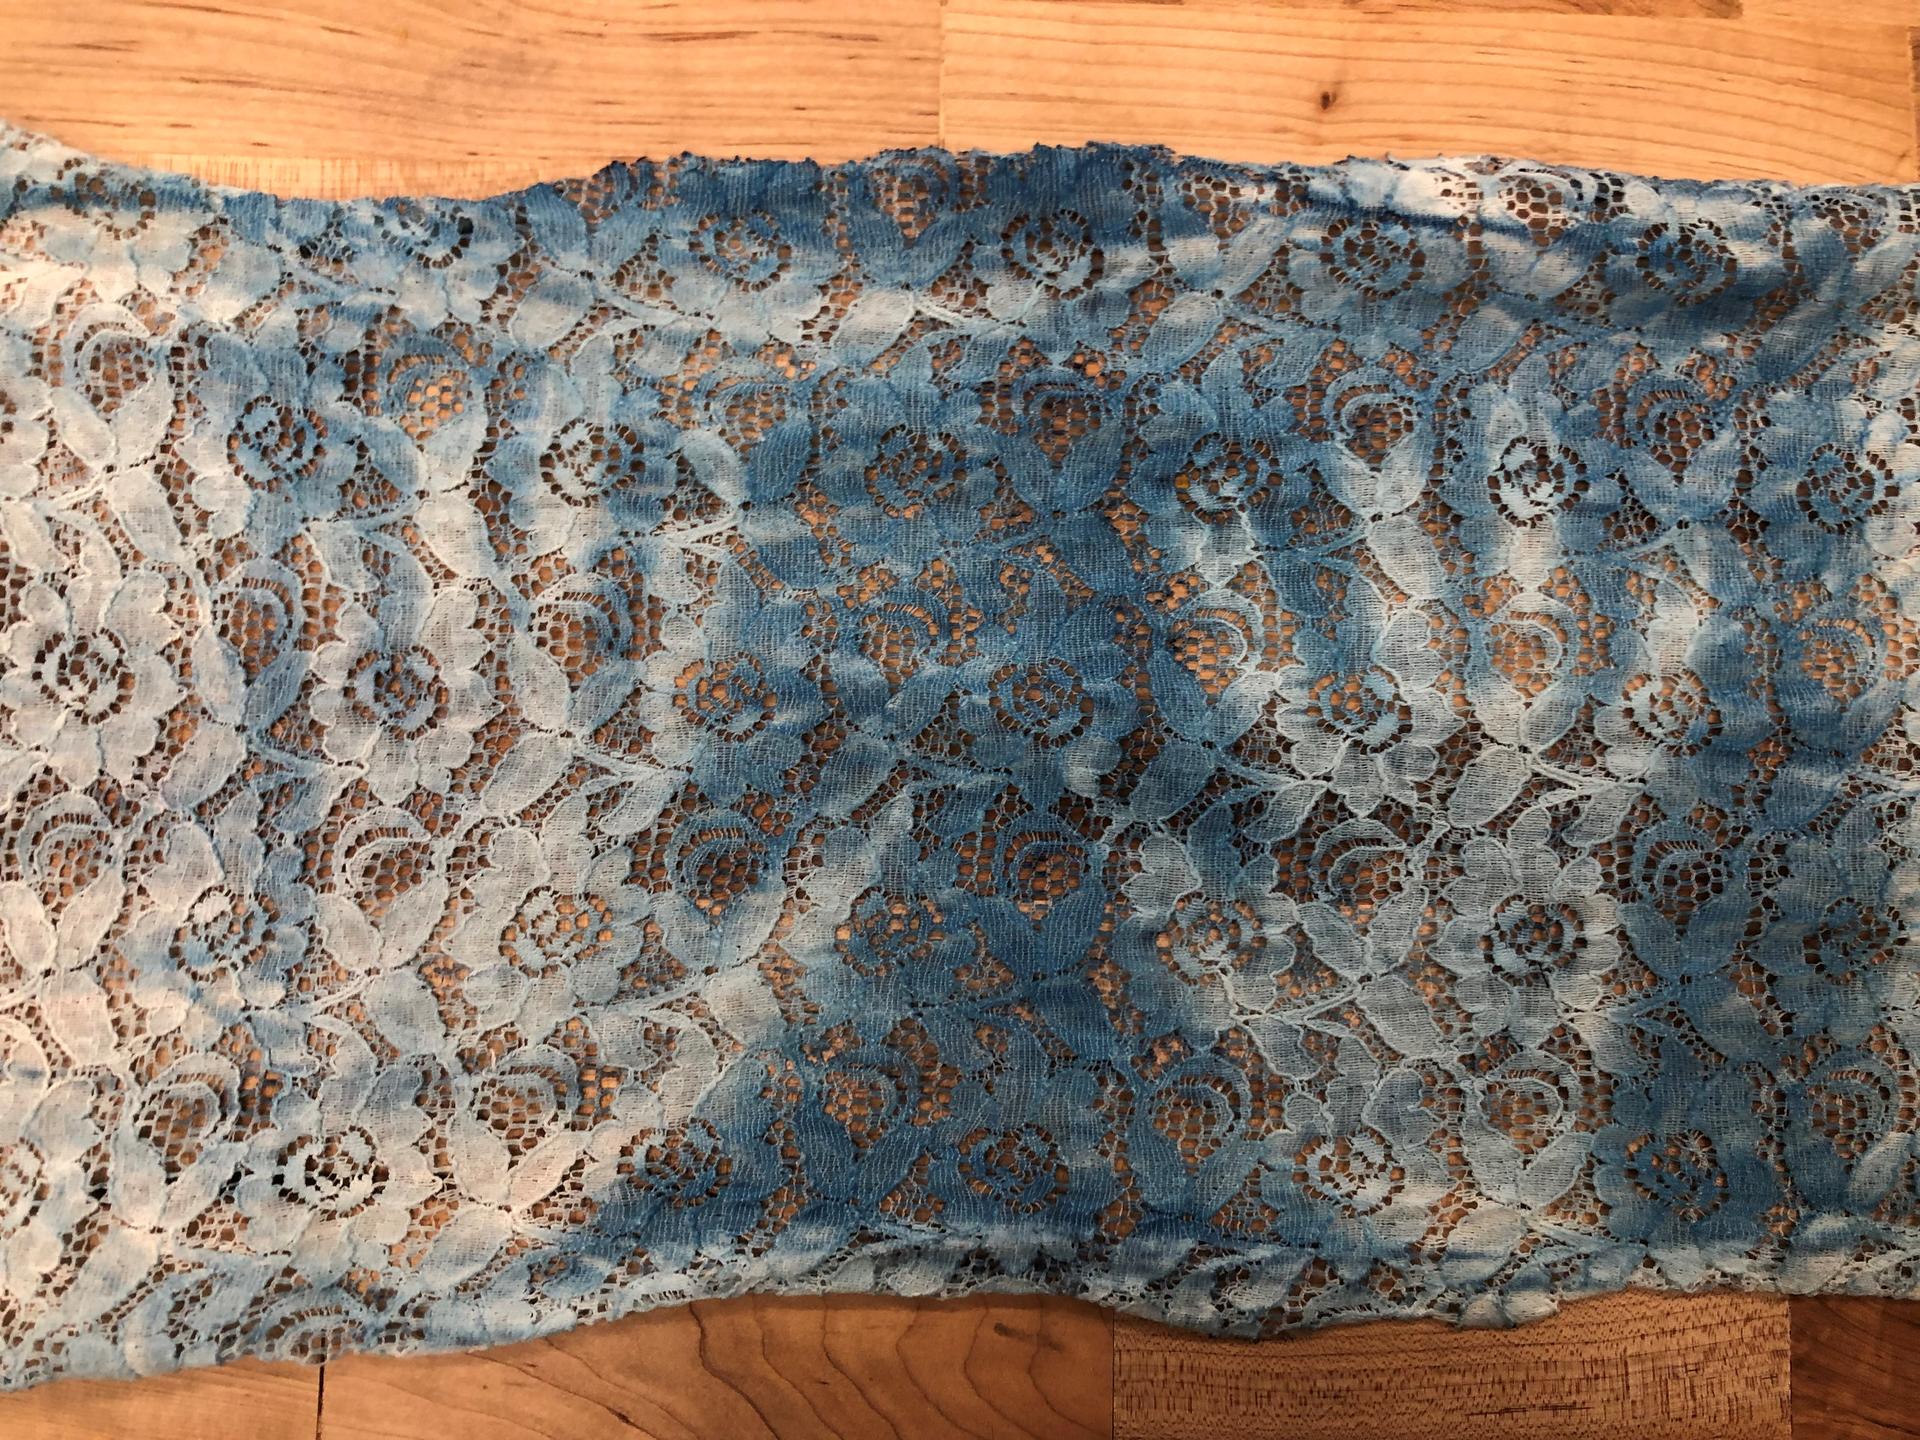 Remnants of handprints on lace due to cyanotype.